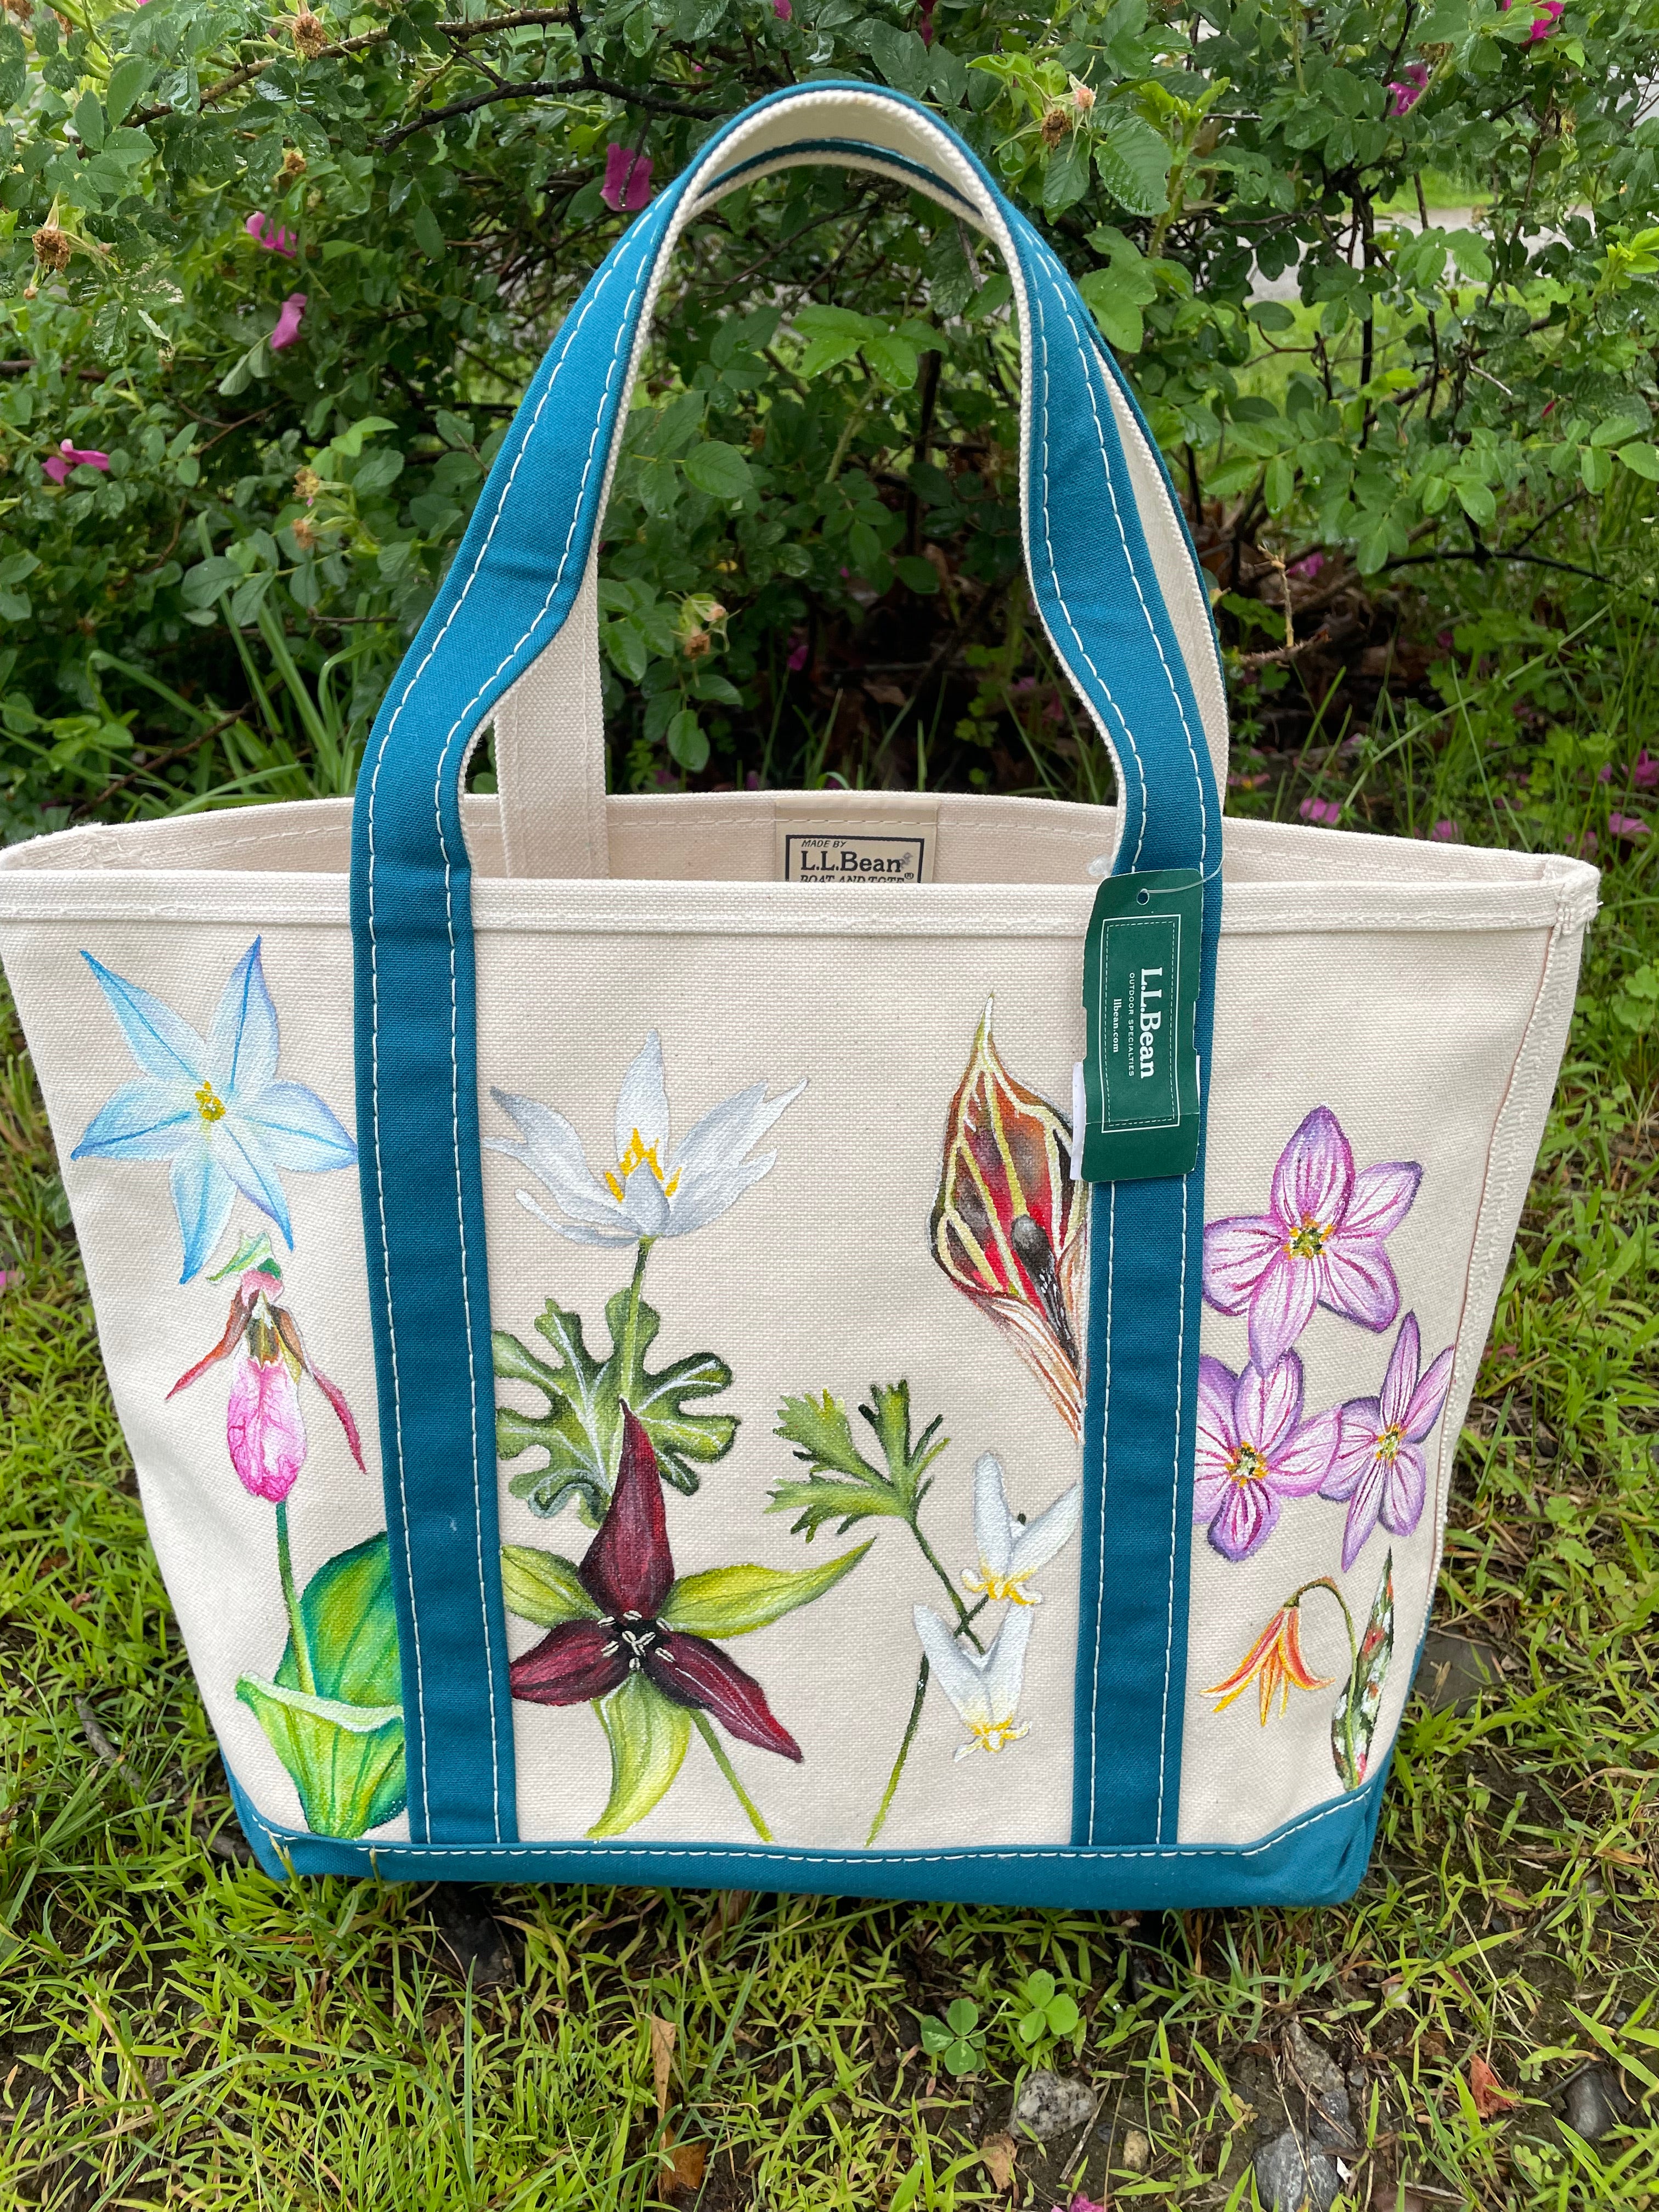 Tote Bag Painting Ideas